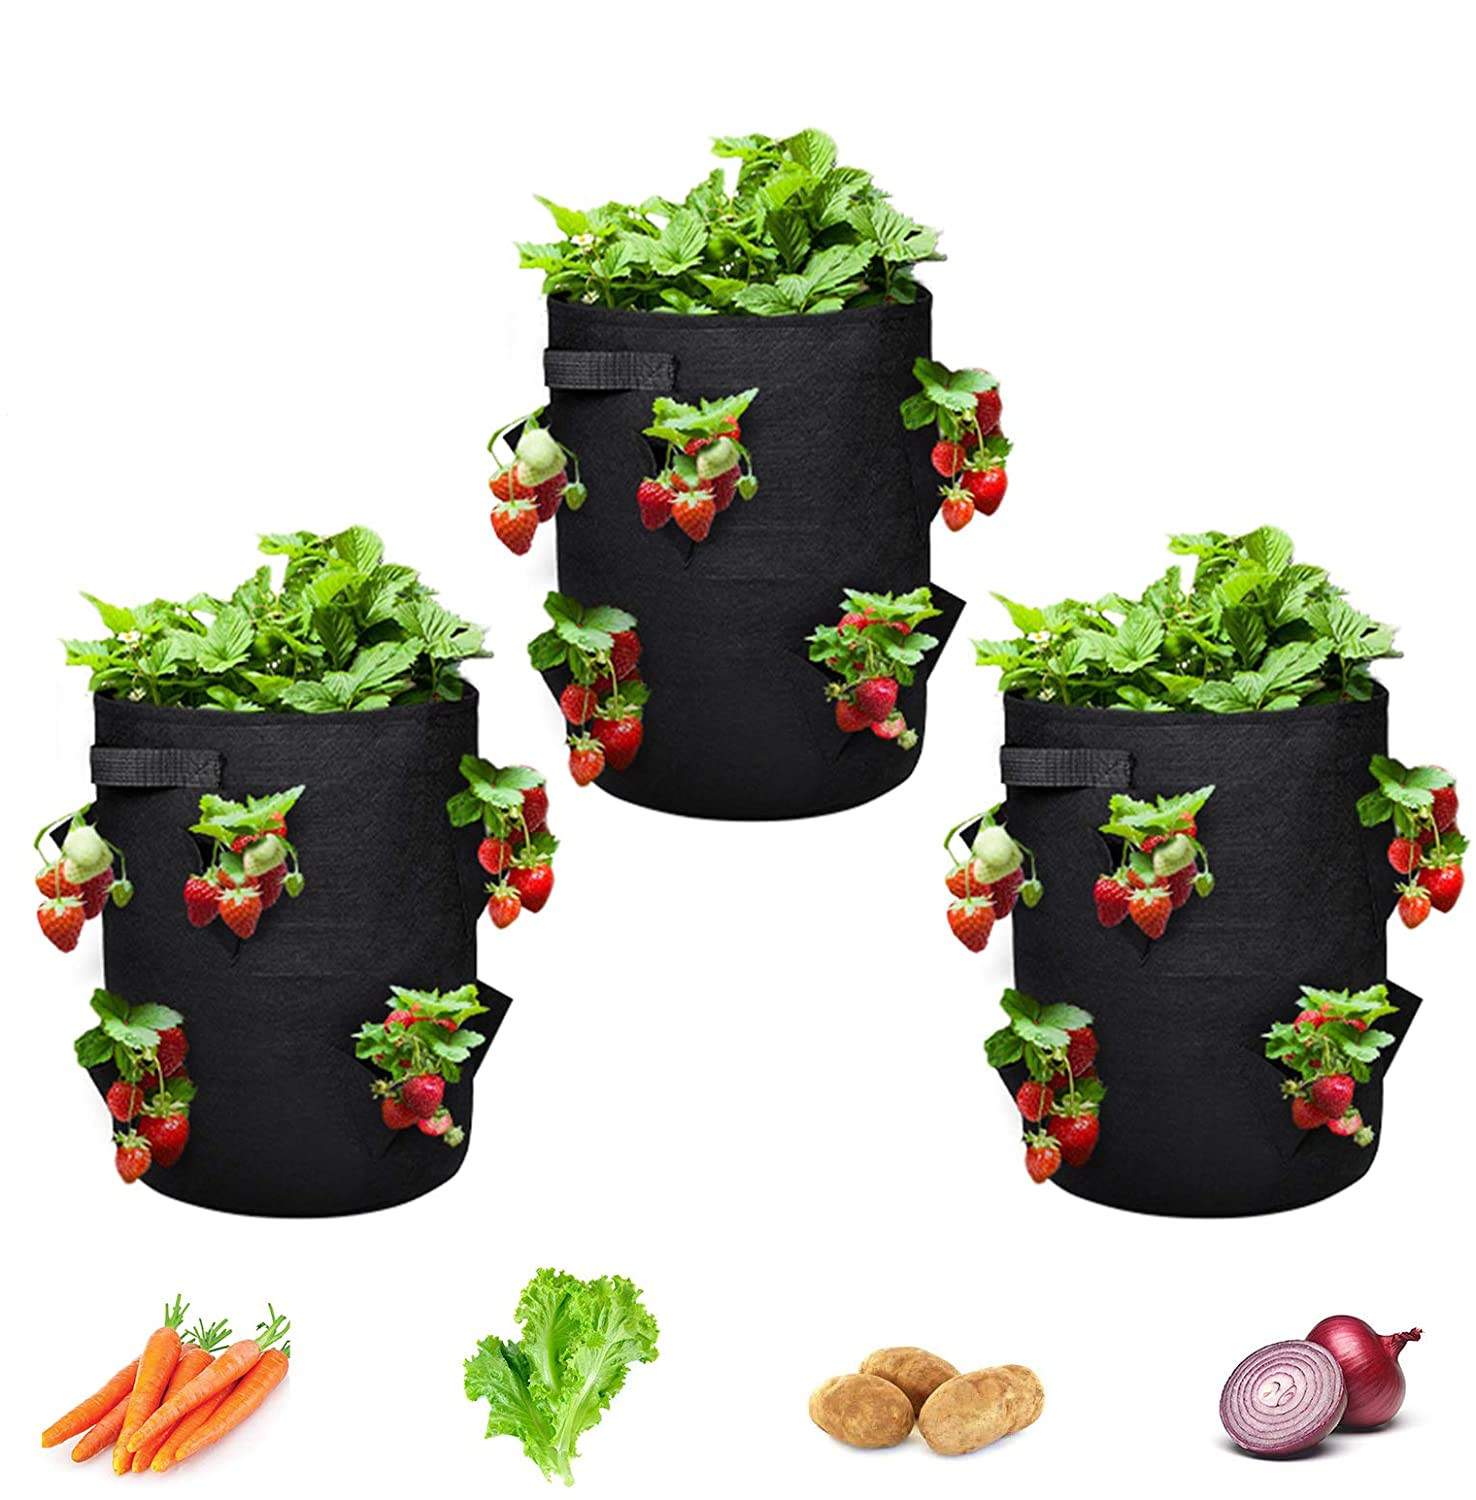 Strawberry Plant Grow Bag Planting Pouch Fabric Grow Pots Garden Planter Herb Grower Indoor